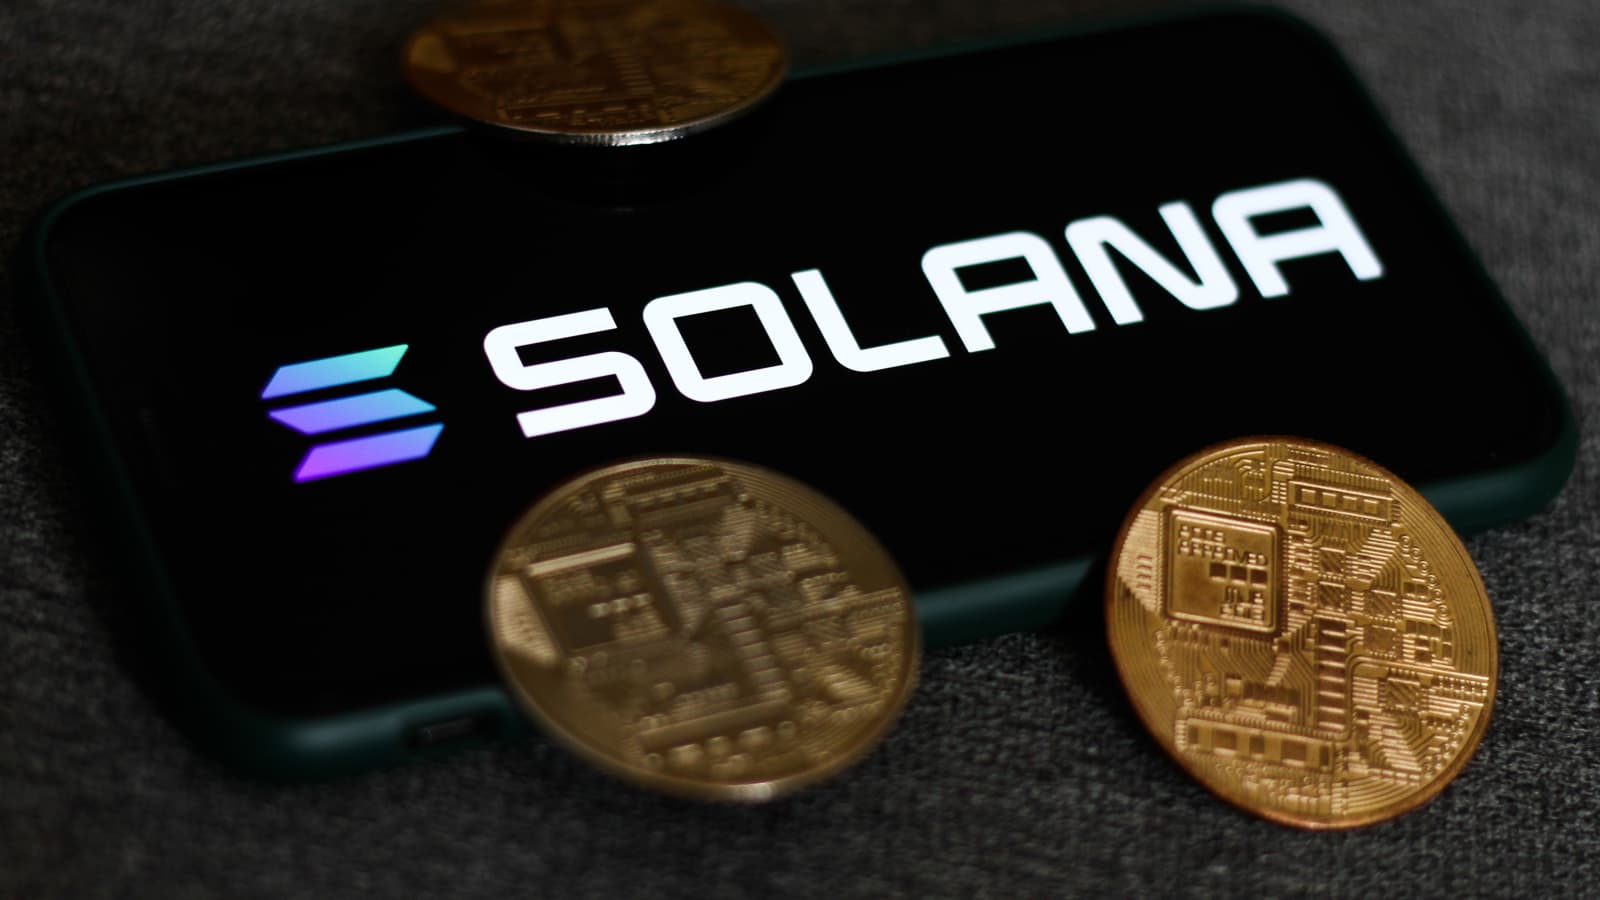 Solana Hits Major Support At $141 Amid Bitcoin Drop, Analyst Says It’s Time To Buy